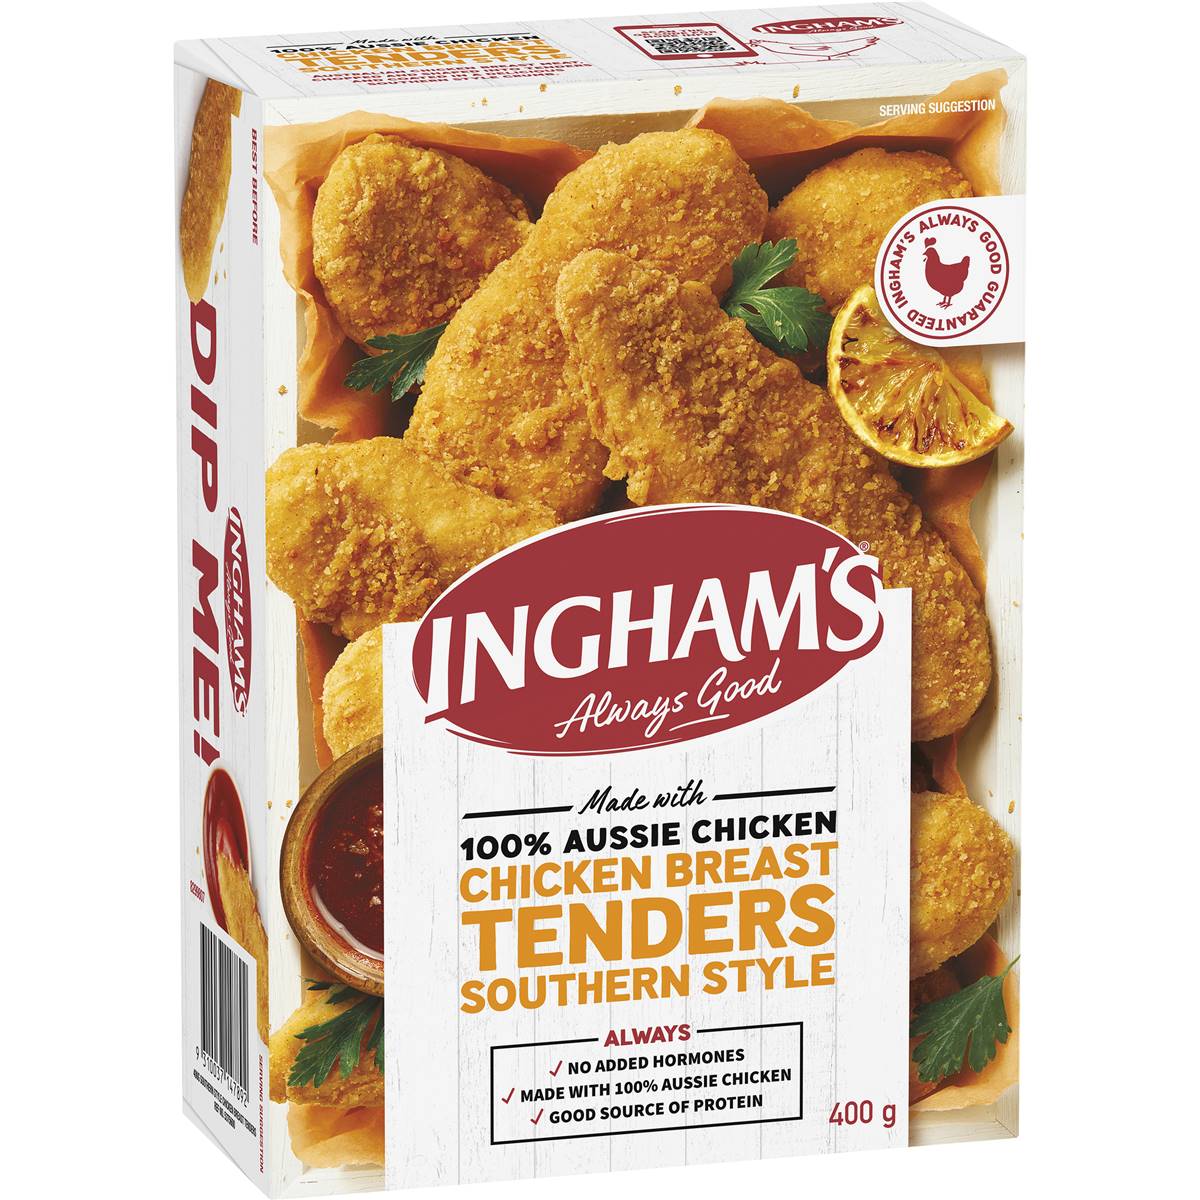 Calories in Ingham's Frozen Chicken Breast Tenders Southern Style